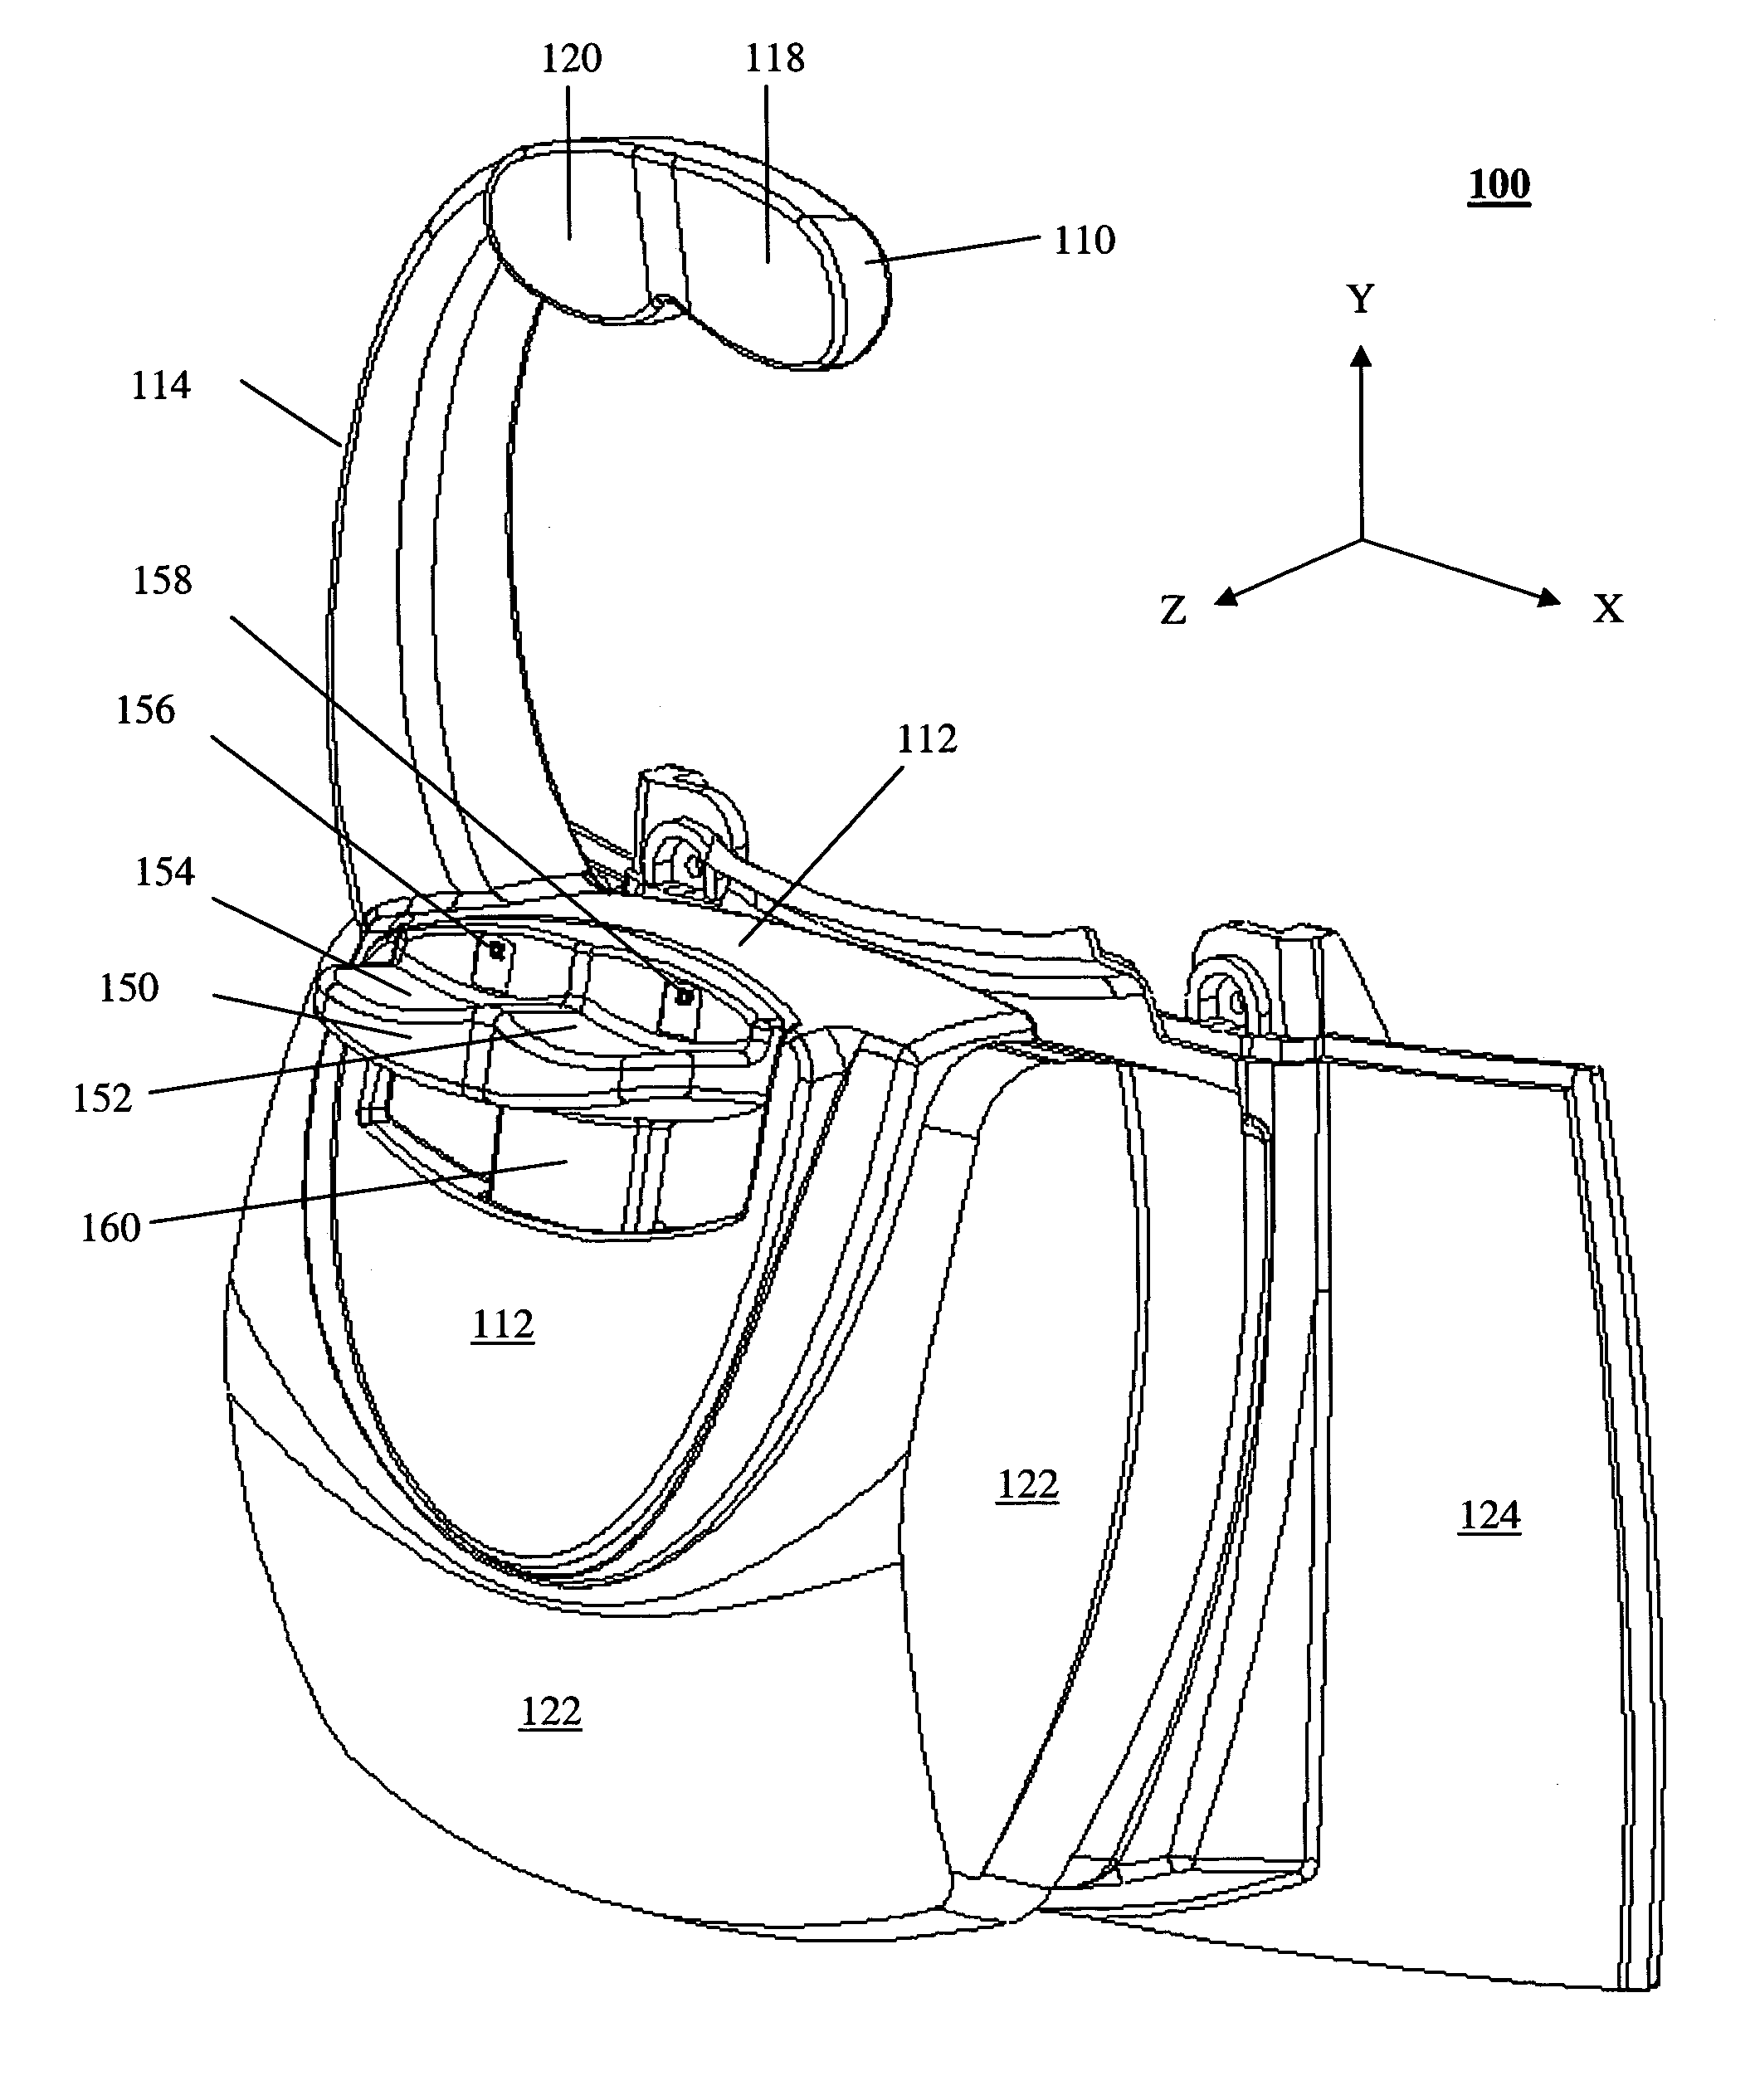 Motorized patient support for eye examination or treatment